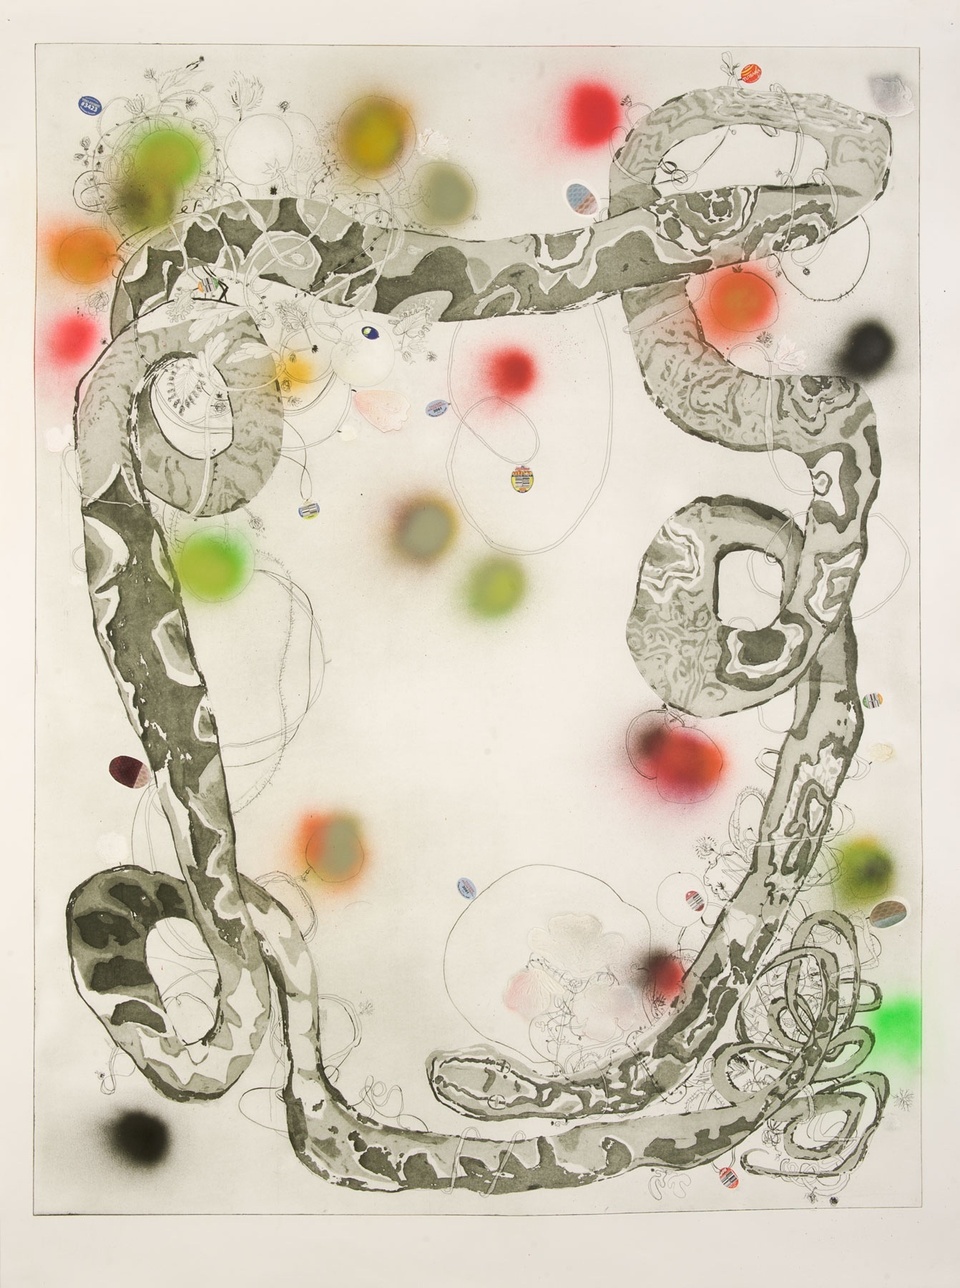 Etching of large snake with spray painted circles of different colors spread throughout